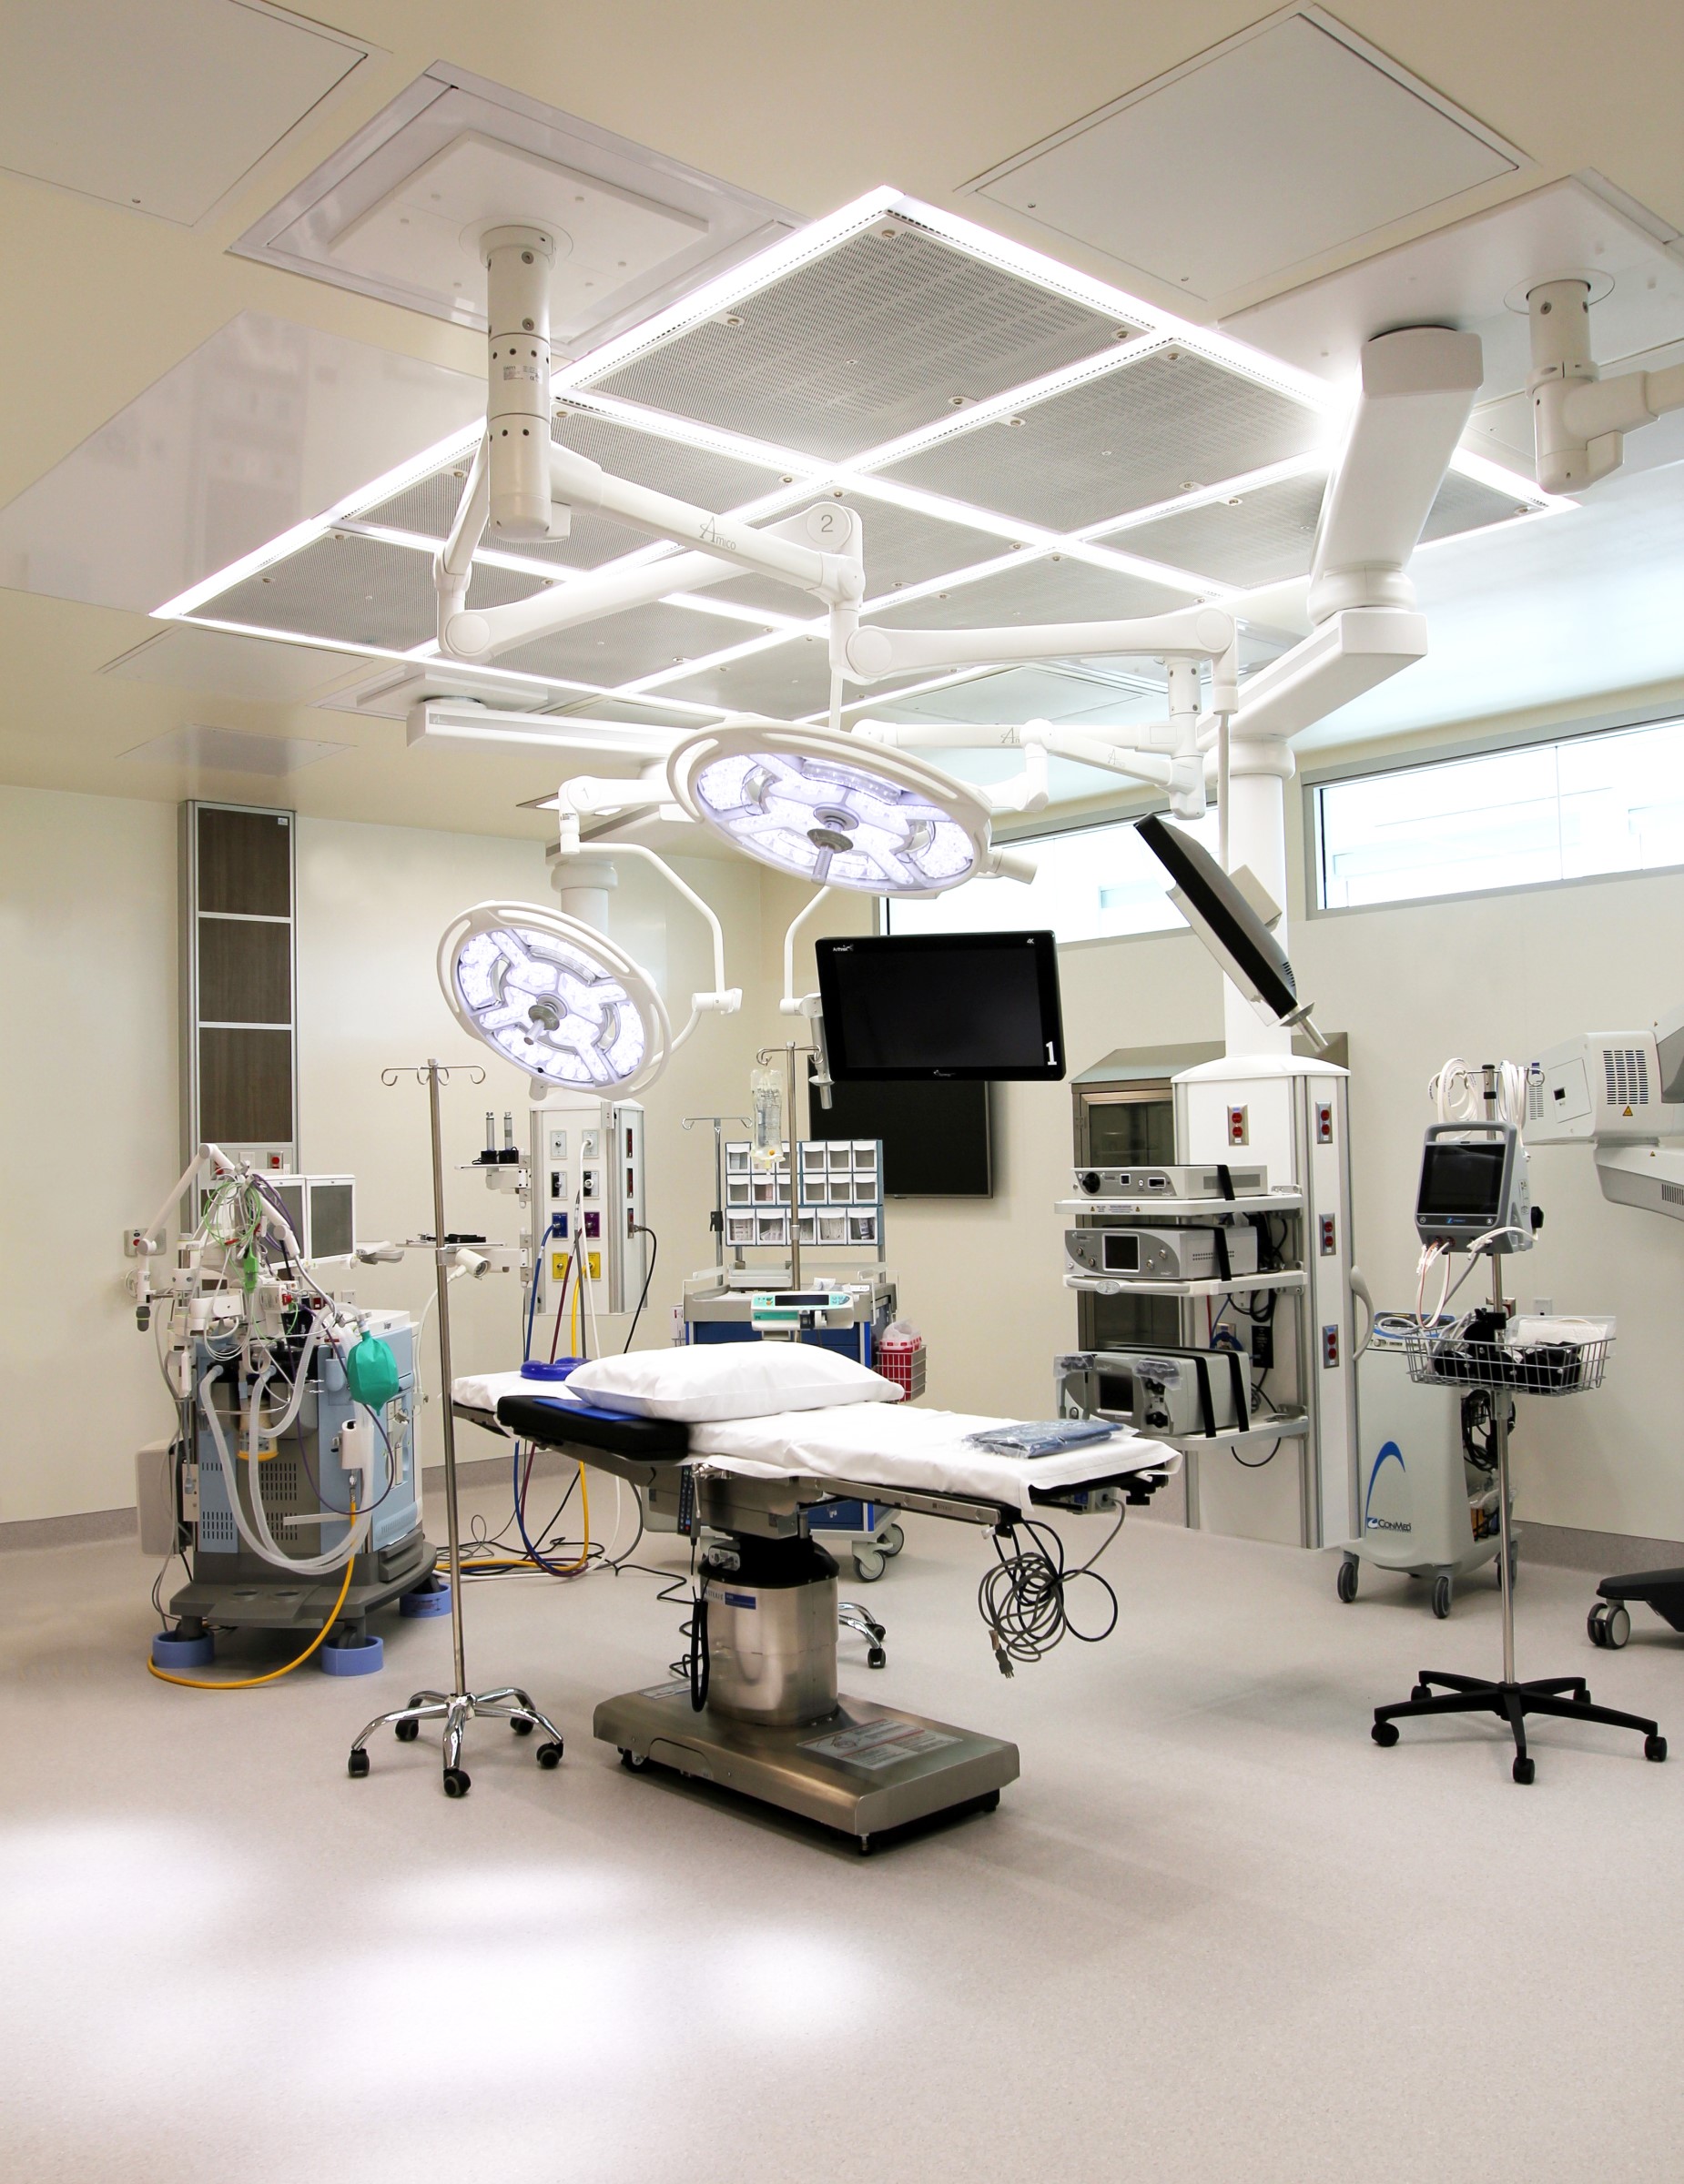 Operating room ceiling